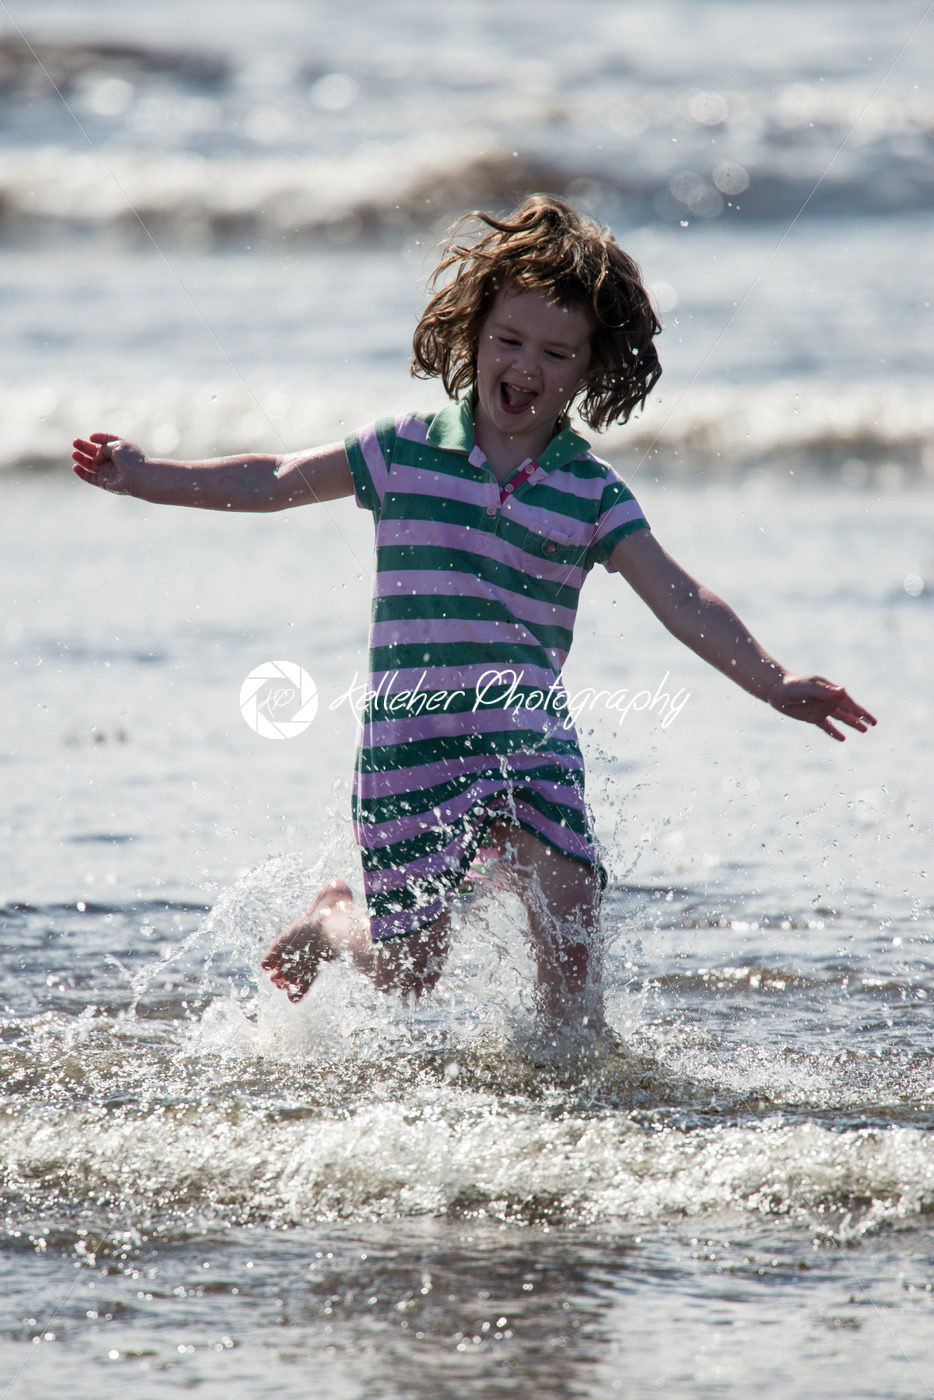 Young little girl on beach playing in the surf - Kelleher Photography Store